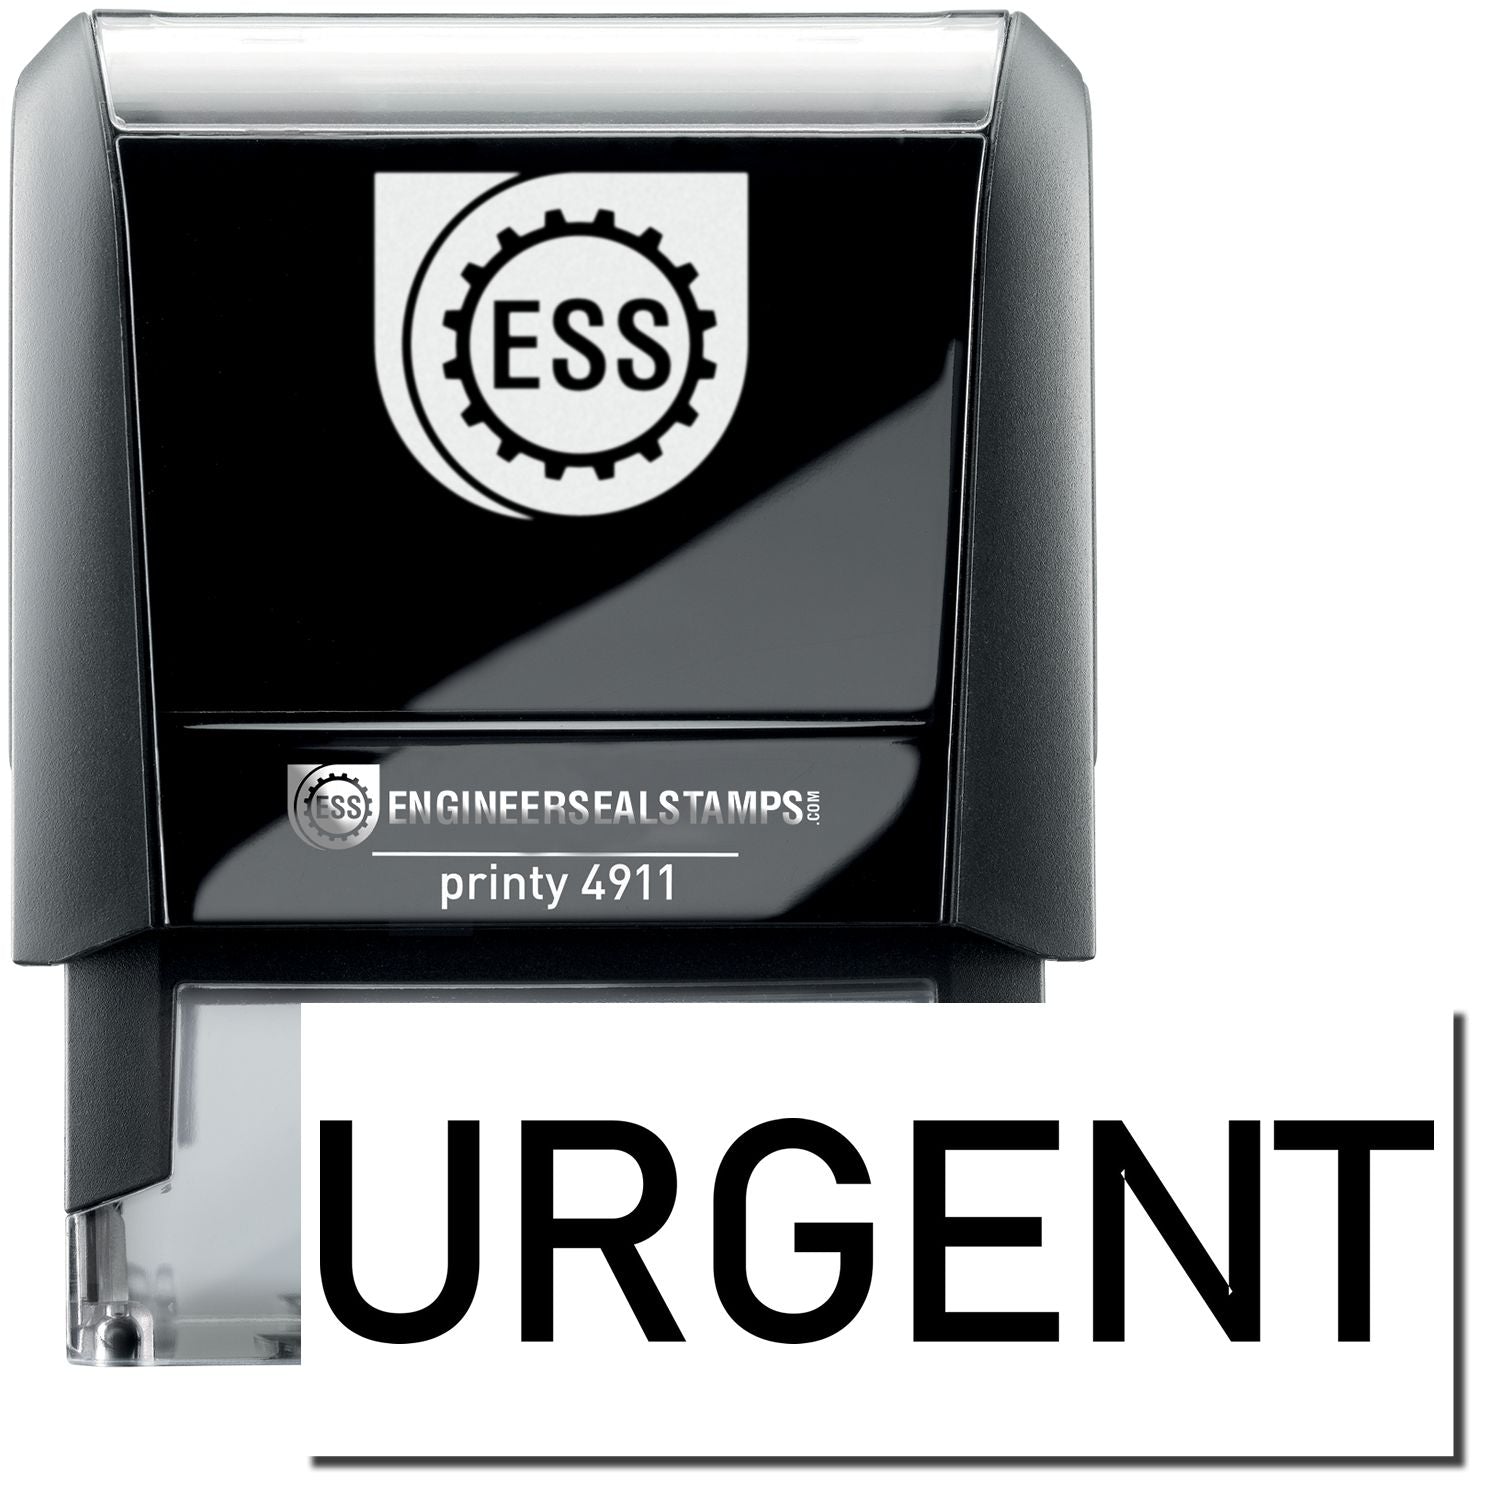 A self-inking stamp with a stamped image showing how the text "URGENT" in a narrow font is displayed after stamping.